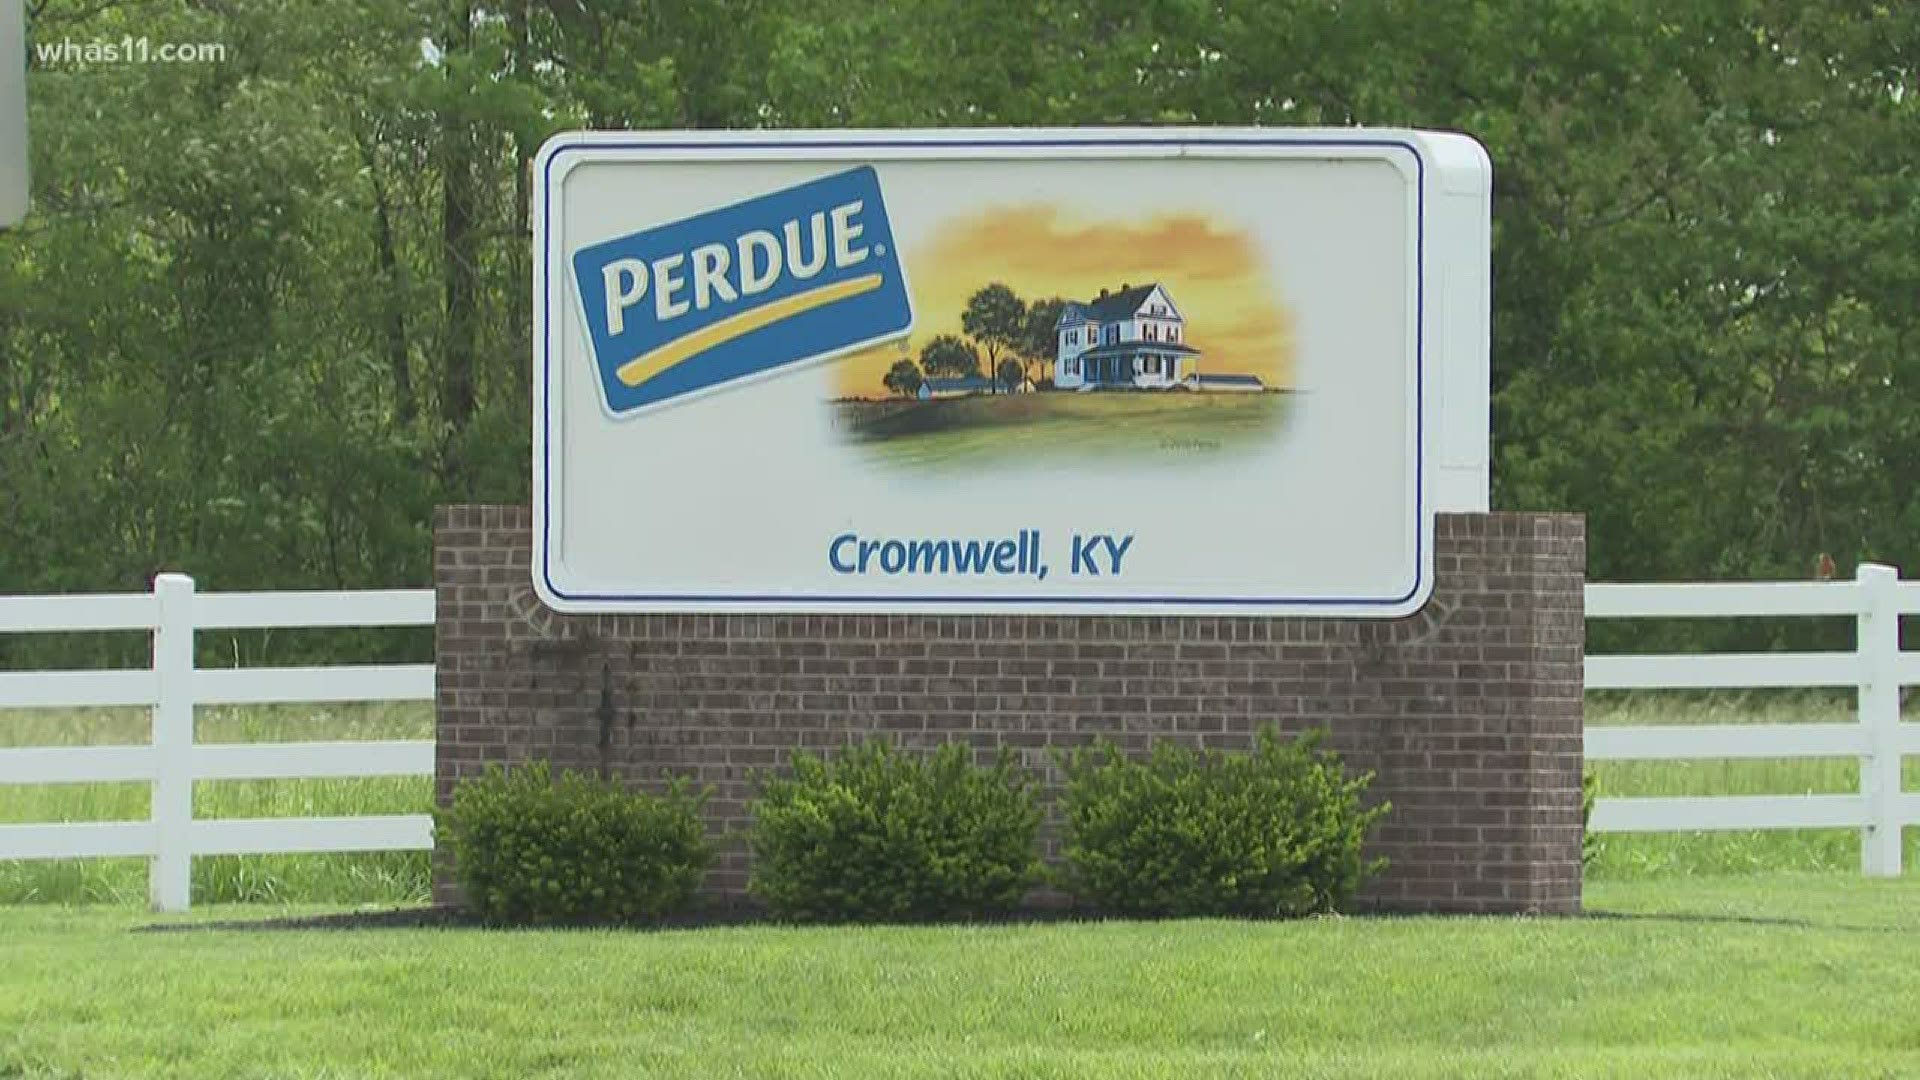 As the safety of the food supply chain has come under question, health care workers are testing employees at the Purdue plan in Kentucky.